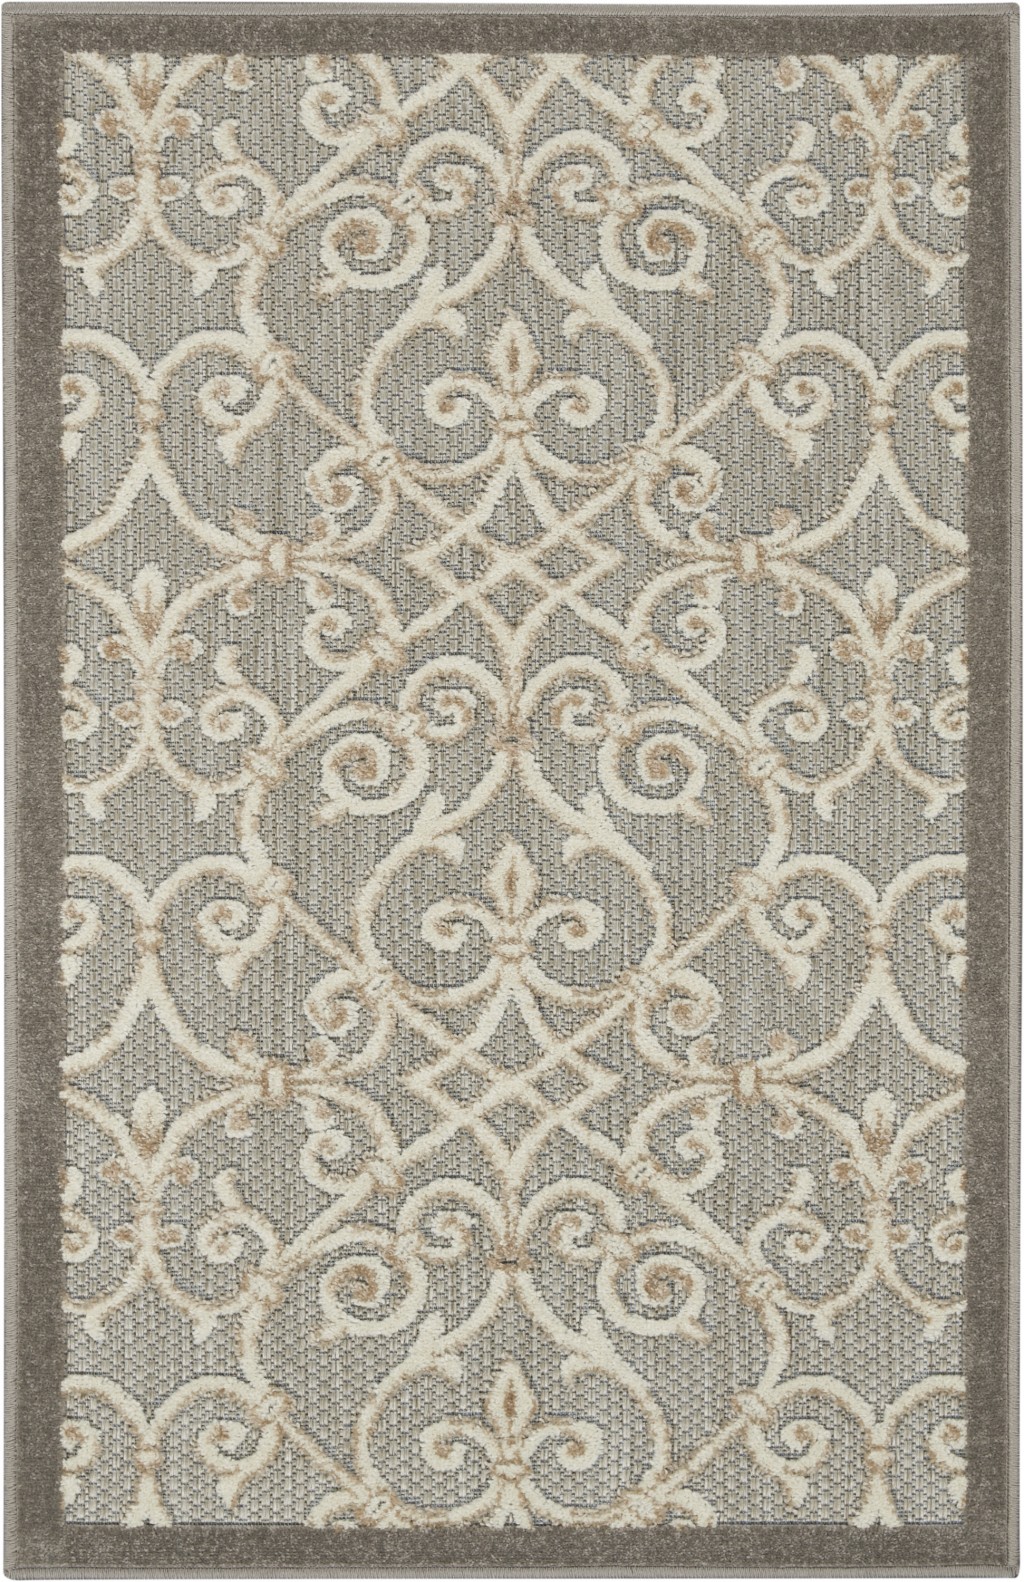 3' X 4' Gray And Ivory Floral Indoor Outdoor Area Rug-385047-1